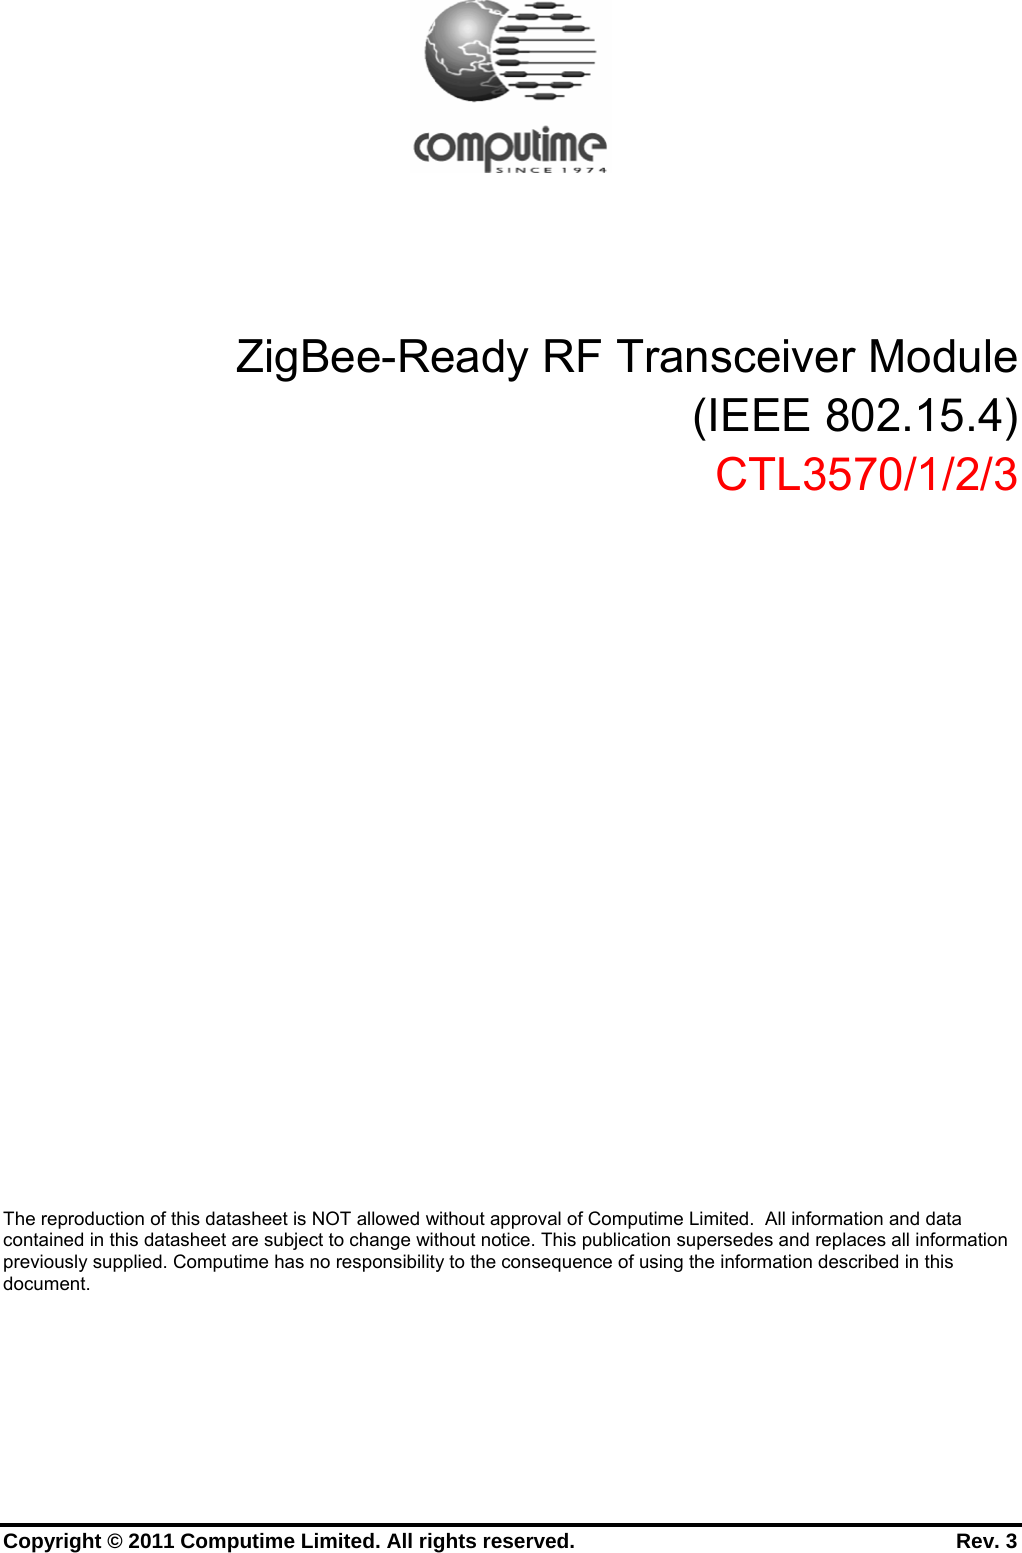      Copyright © 2011 Computime Limited. All rights reserved.                                                       Rev. 3          ZigBee-Ready RF Transceiver Module (IEEE 802.15.4) CTL3570/1/2/3             The reproduction of this datasheet is NOT allowed without approval of Computime Limited.  All information and data contained in this datasheet are subject to change without notice. This publication supersedes and replaces all information previously supplied. Computime has no responsibility to the consequence of using the information described in this document. 